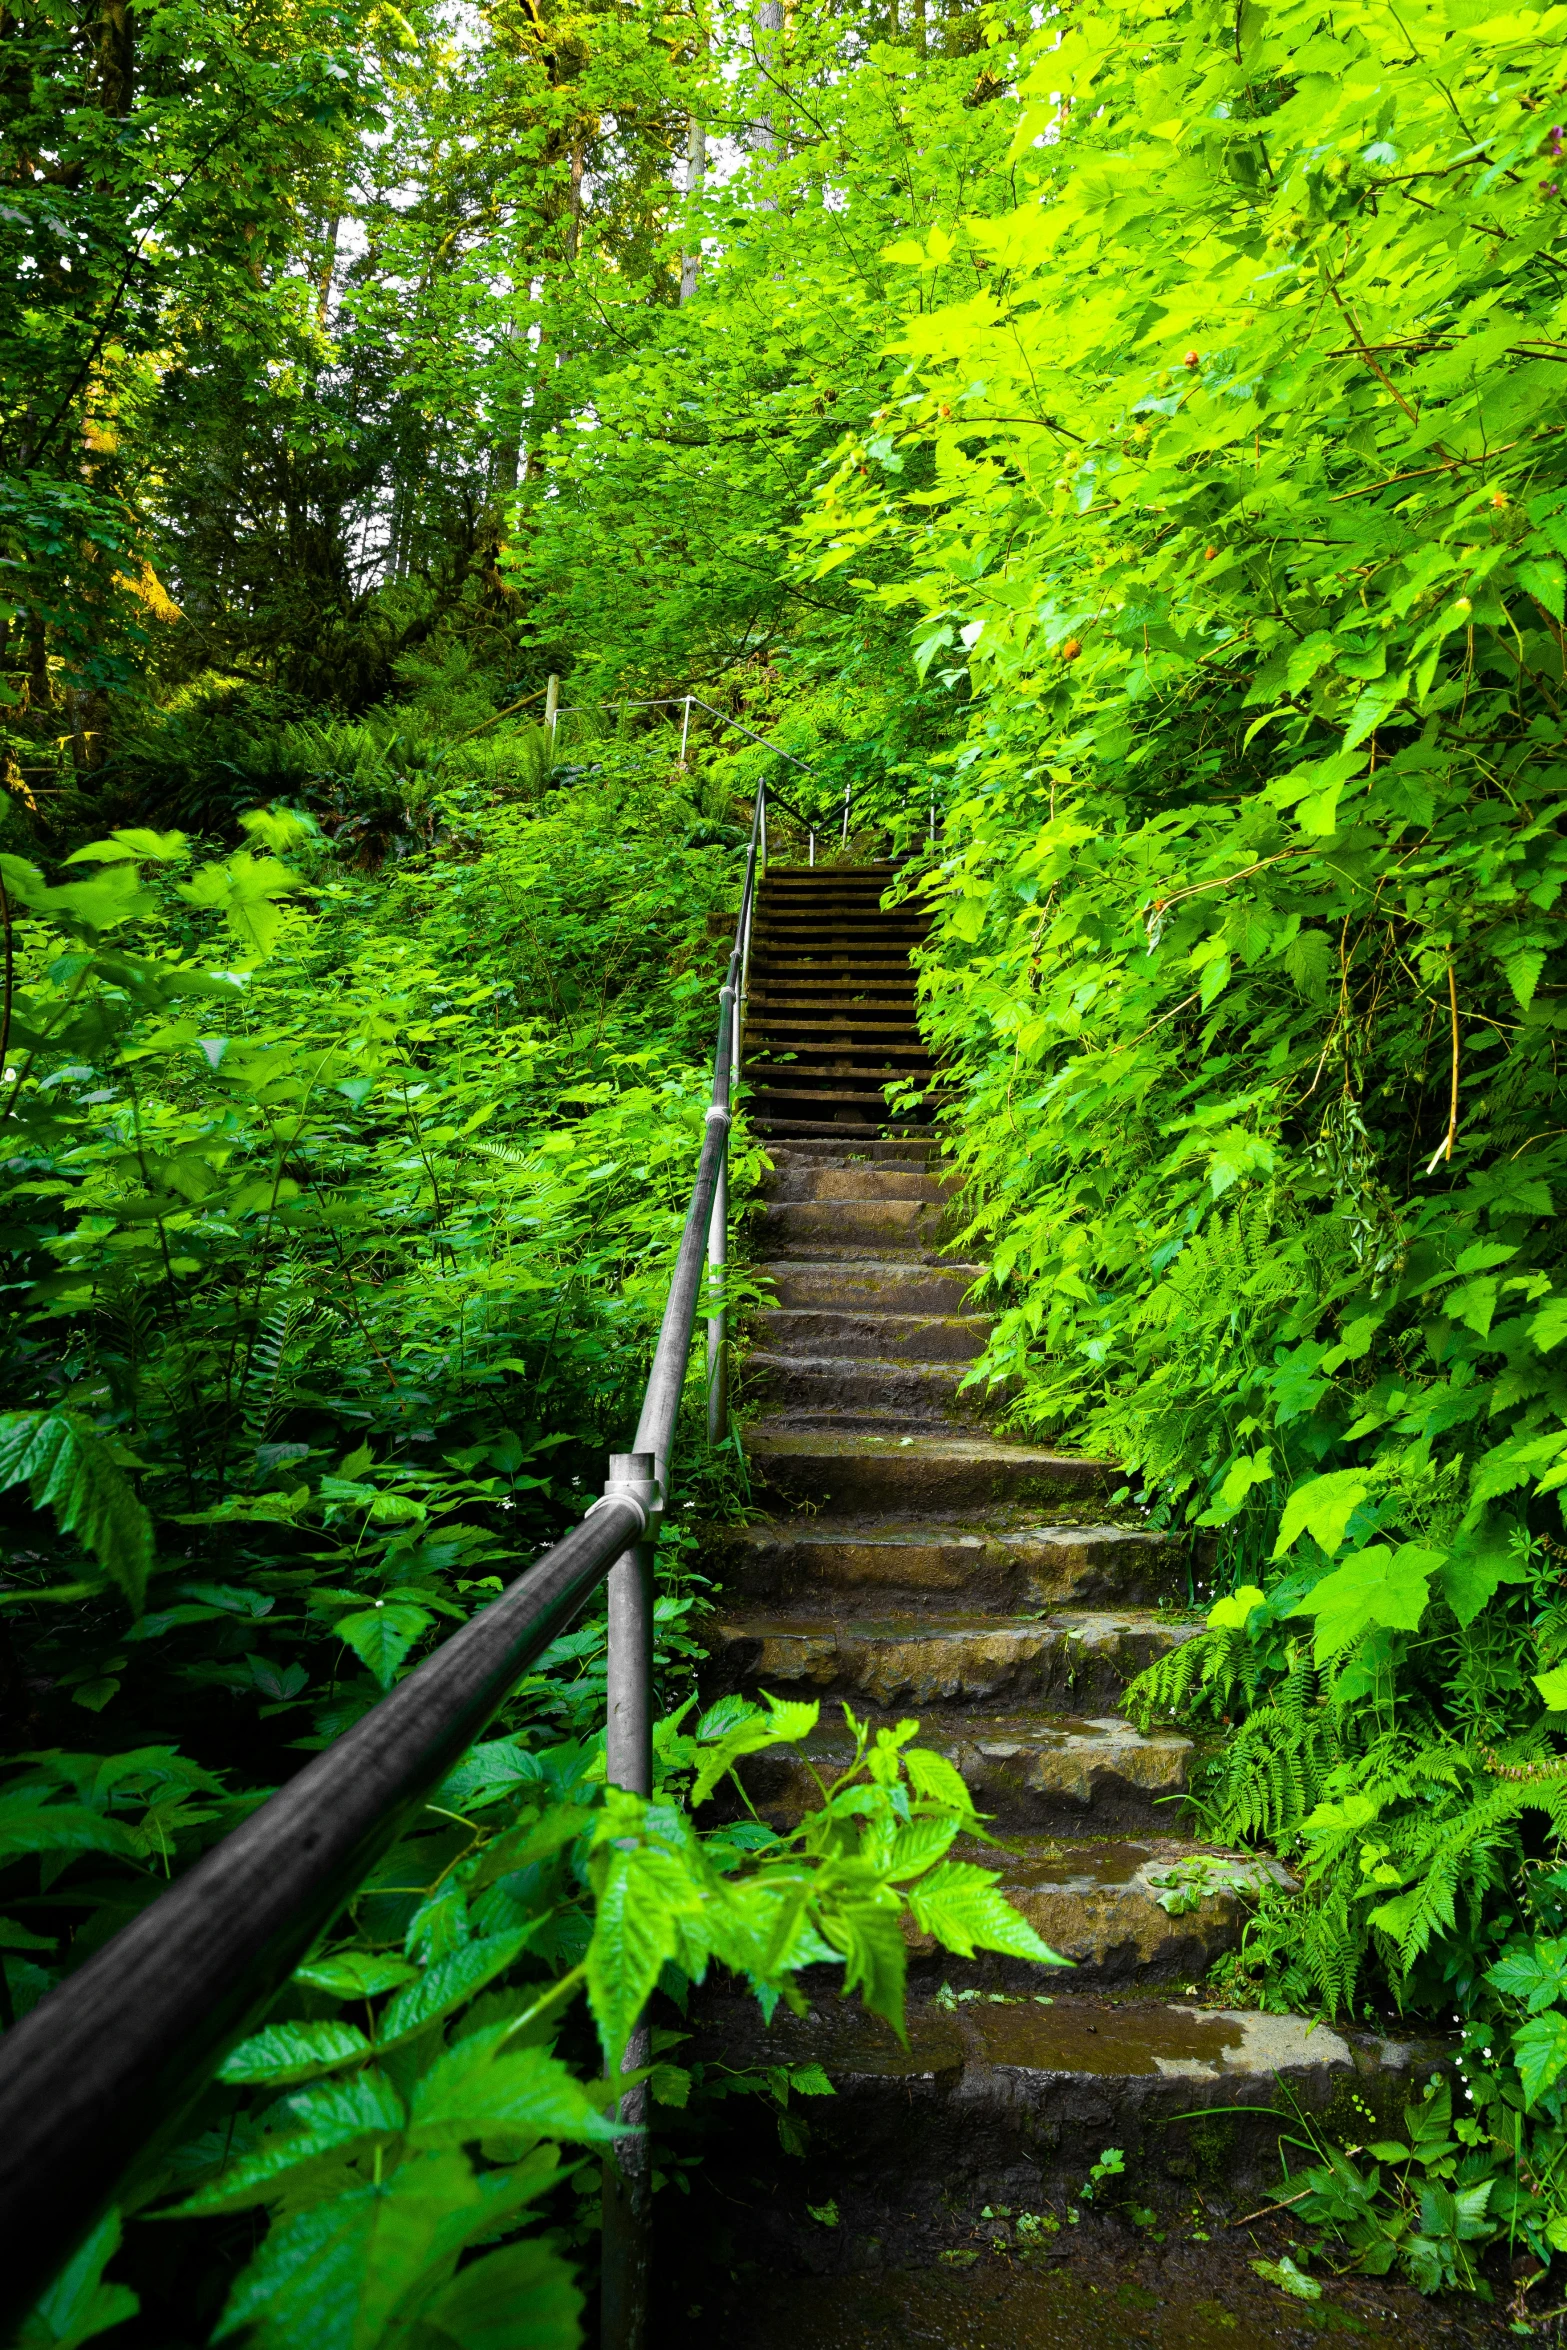 a set of stairs in the middle of a lush green forest, overgrown vines, daniel richter, hiking trail, commercially ready